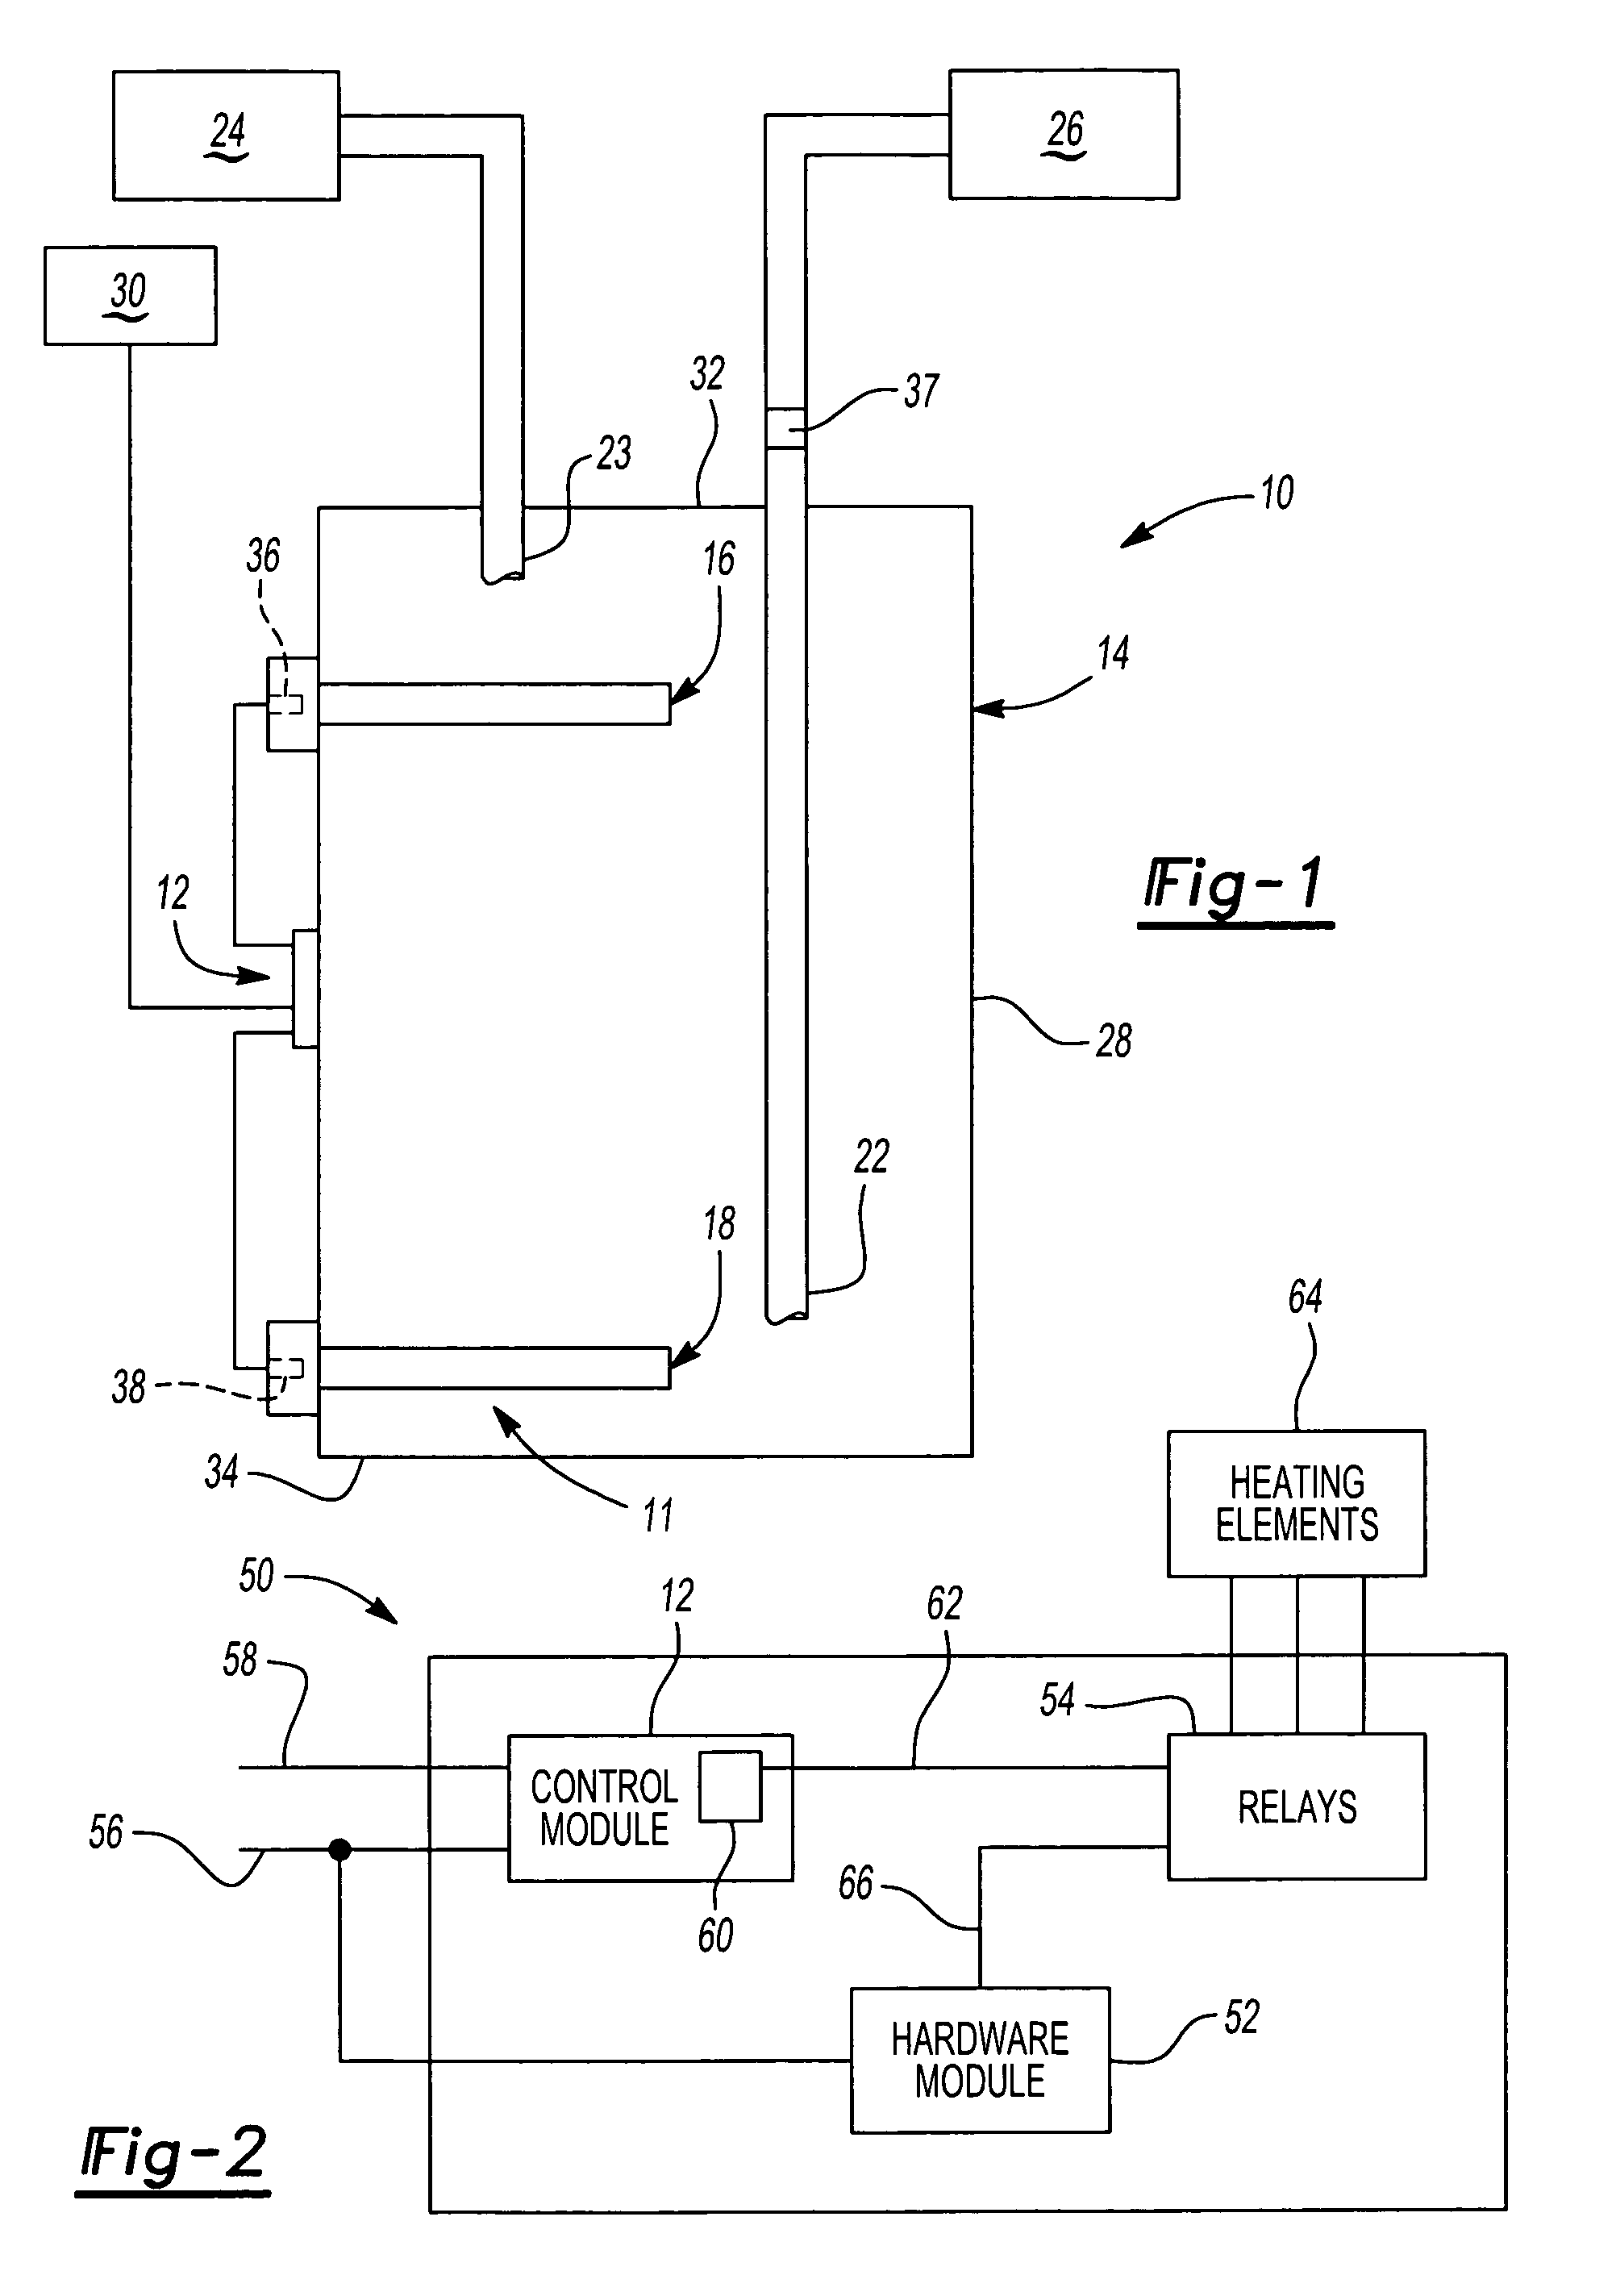 Control and method for operating an electric water heater